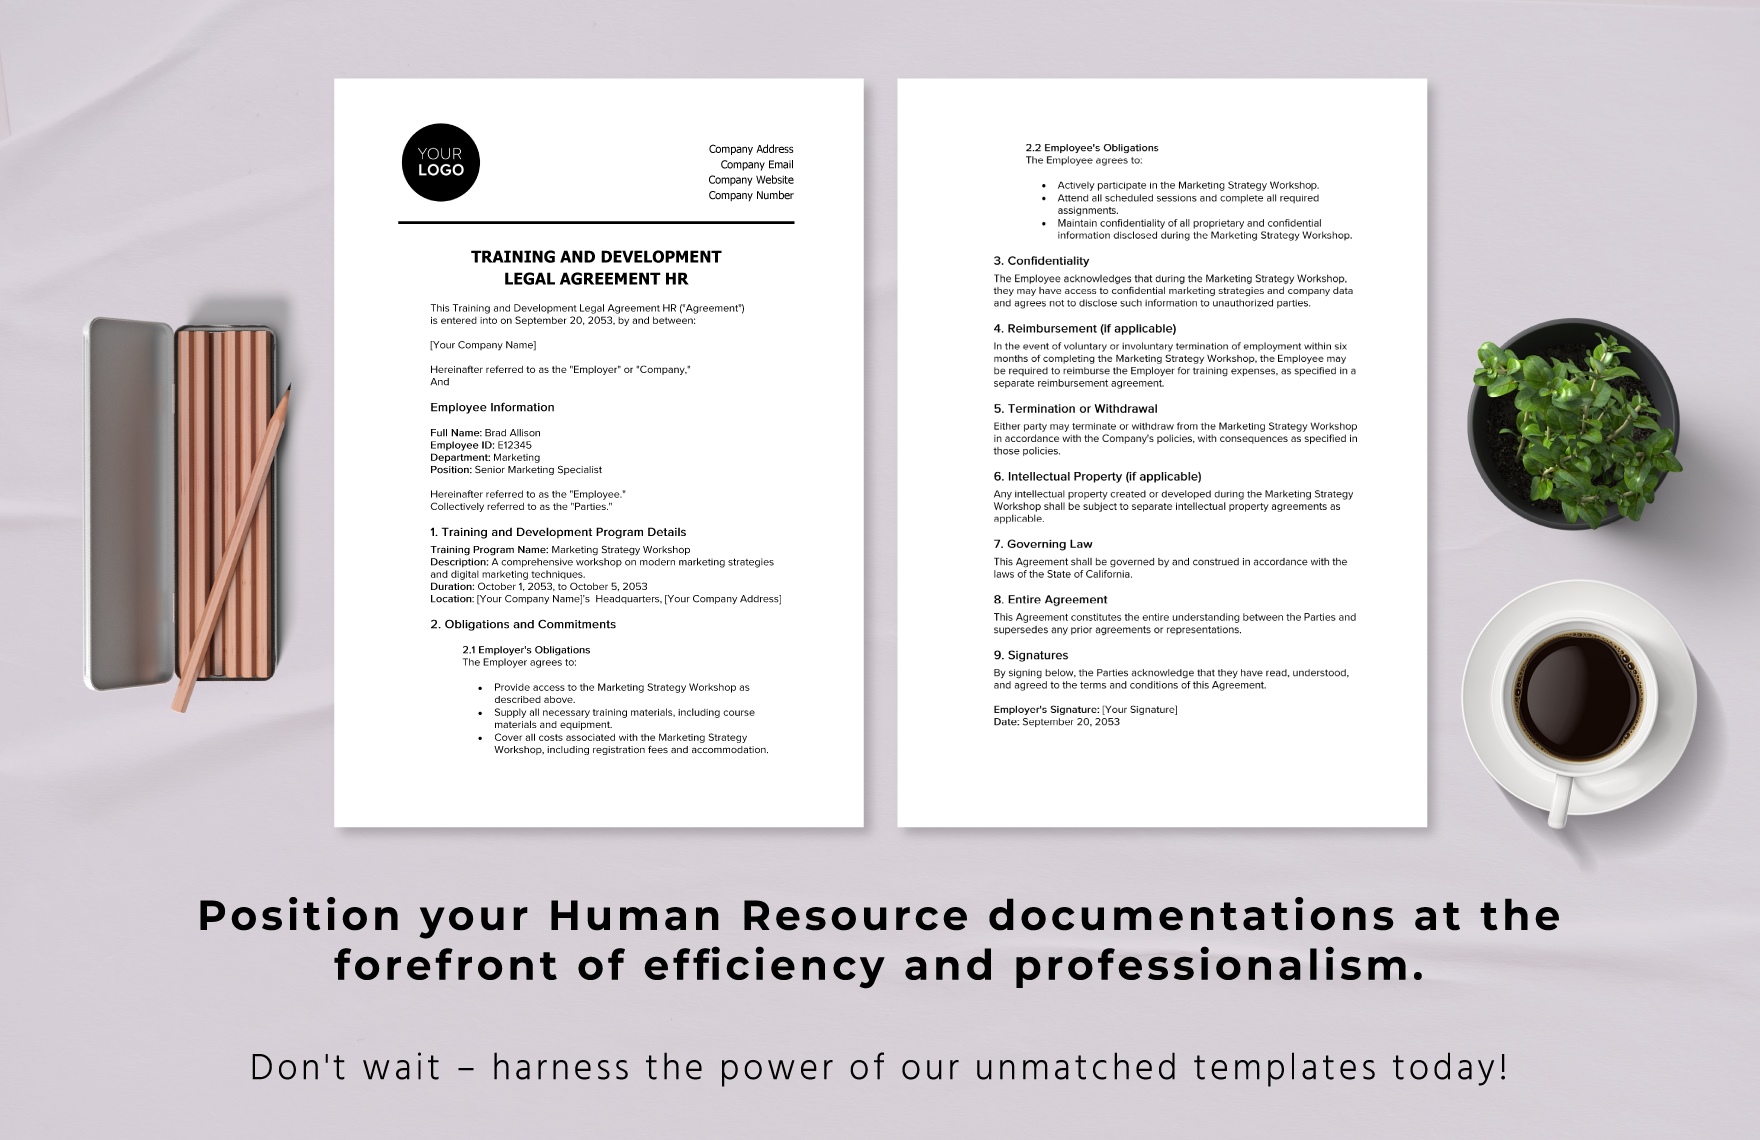 Training and Development Legal Agreement HR Template